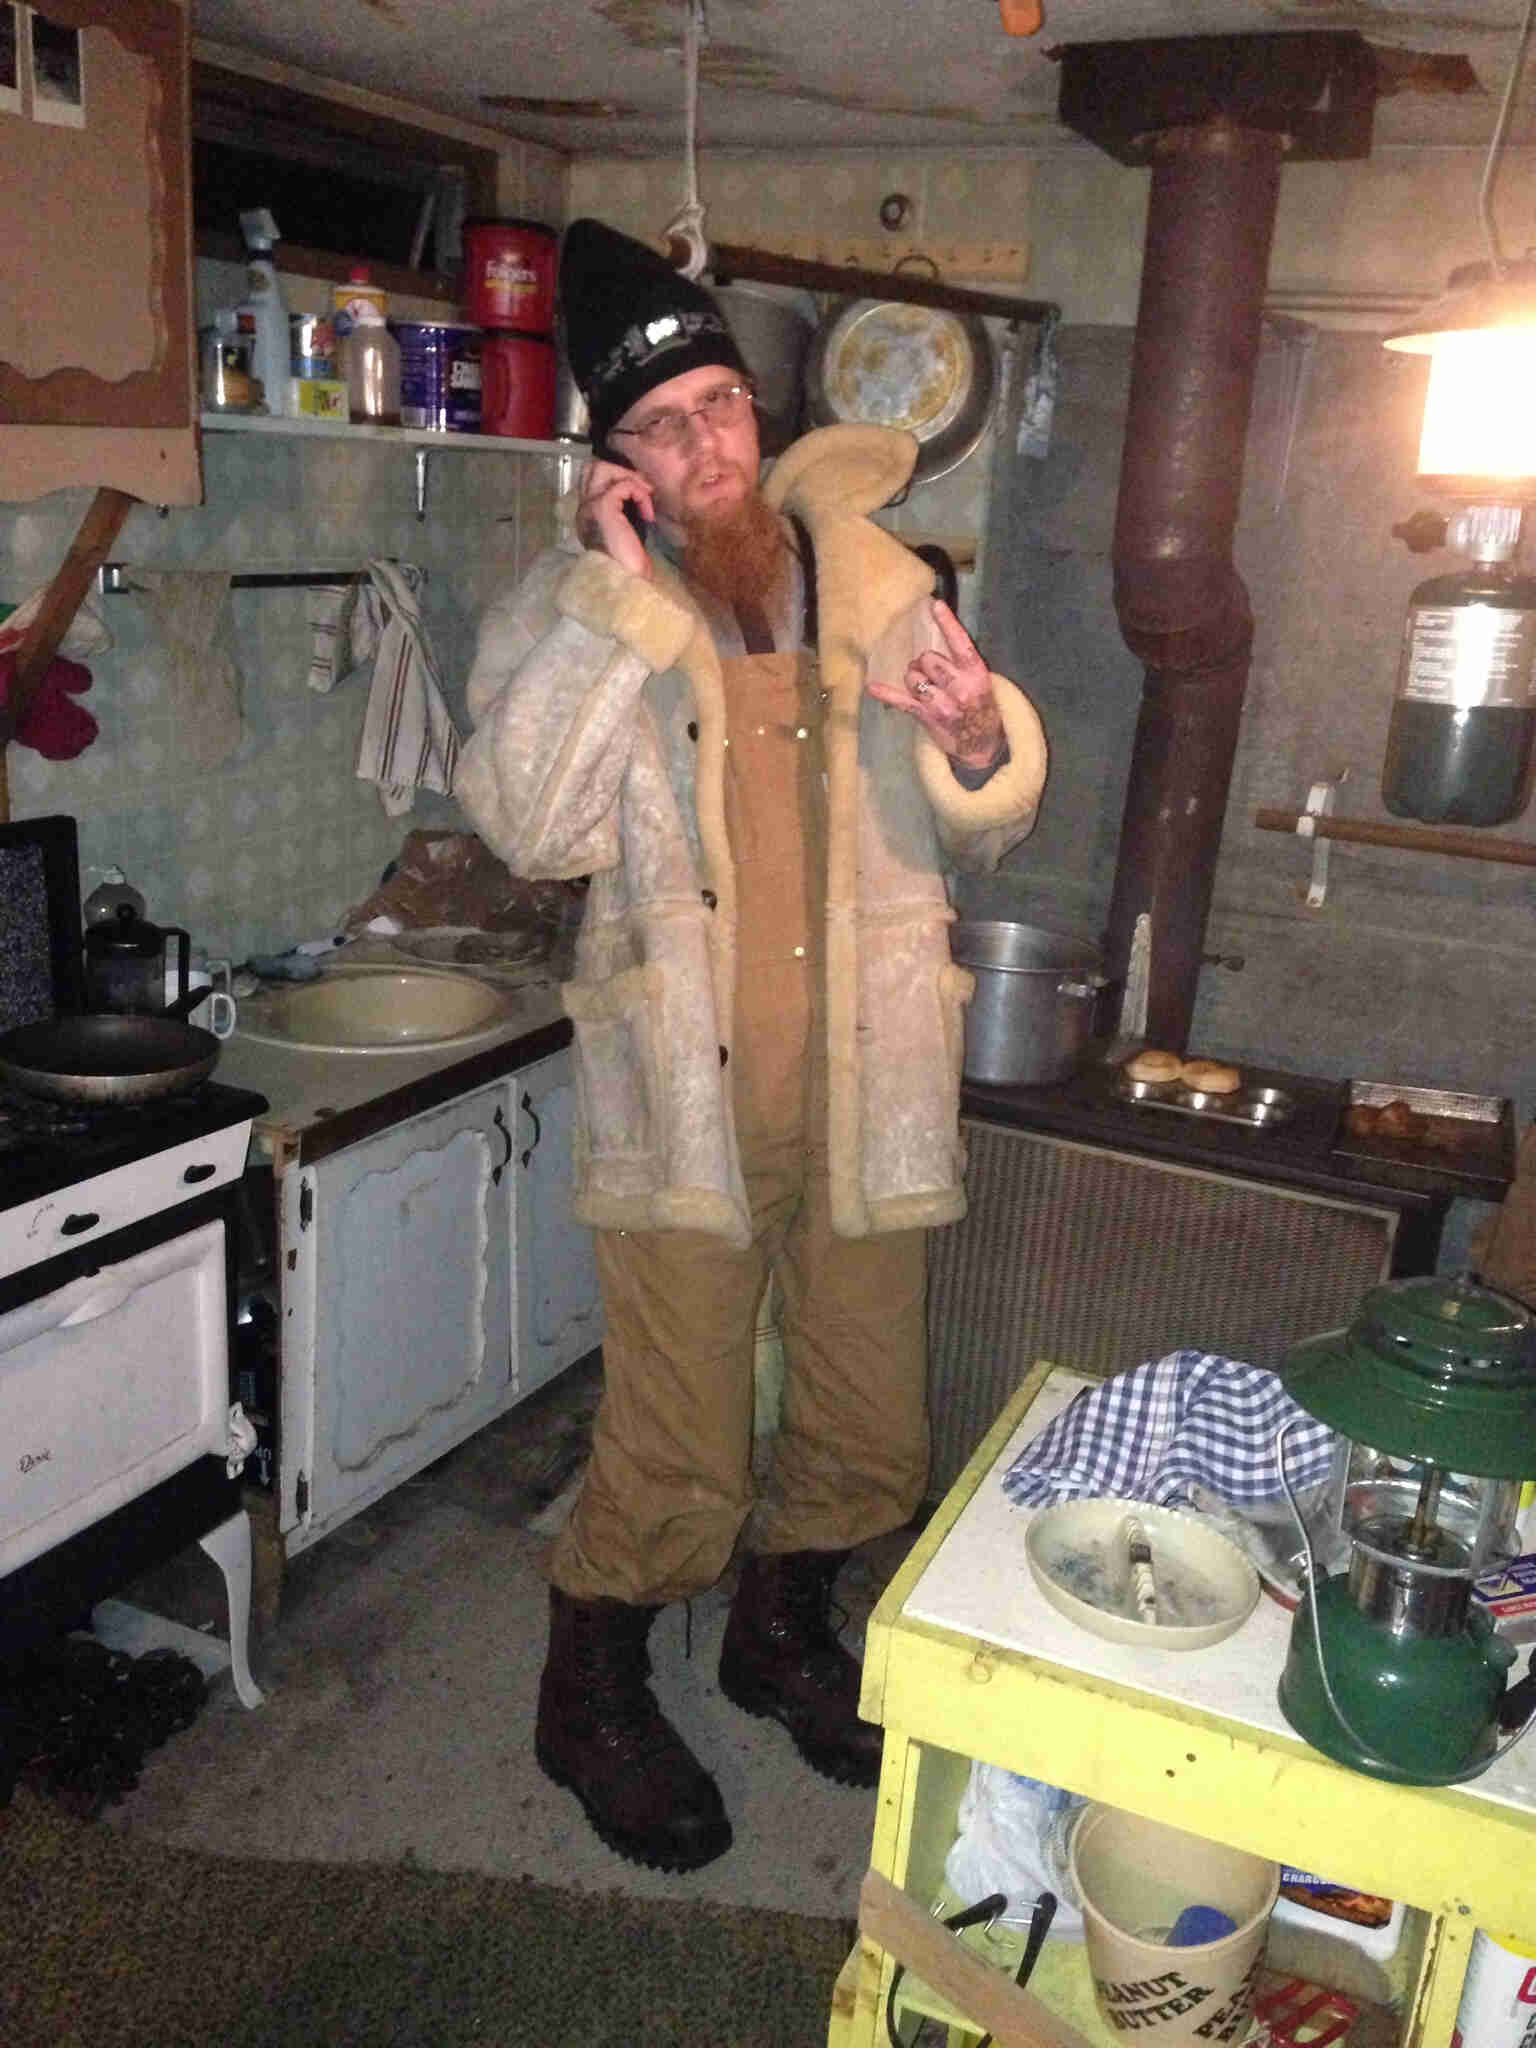 Front view of a person standing in a hunting shack cabin, with their left hand pointer and pinky fingers sticking up